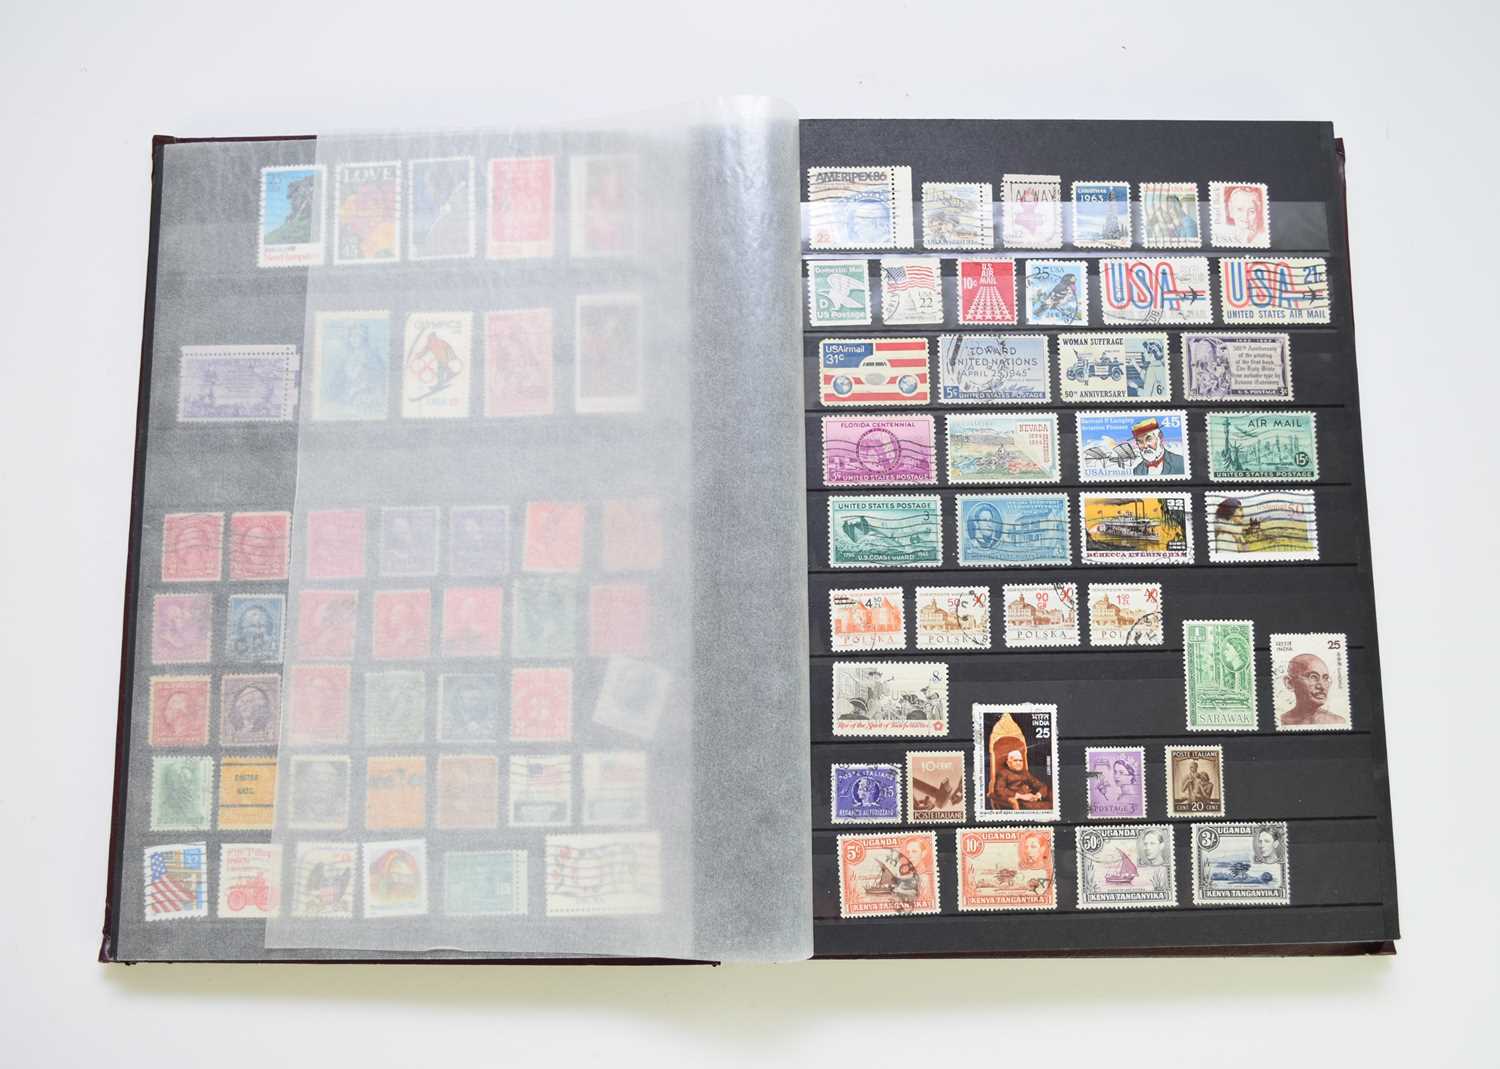 World mix of stamps in burgundy stock book - Image 2 of 3